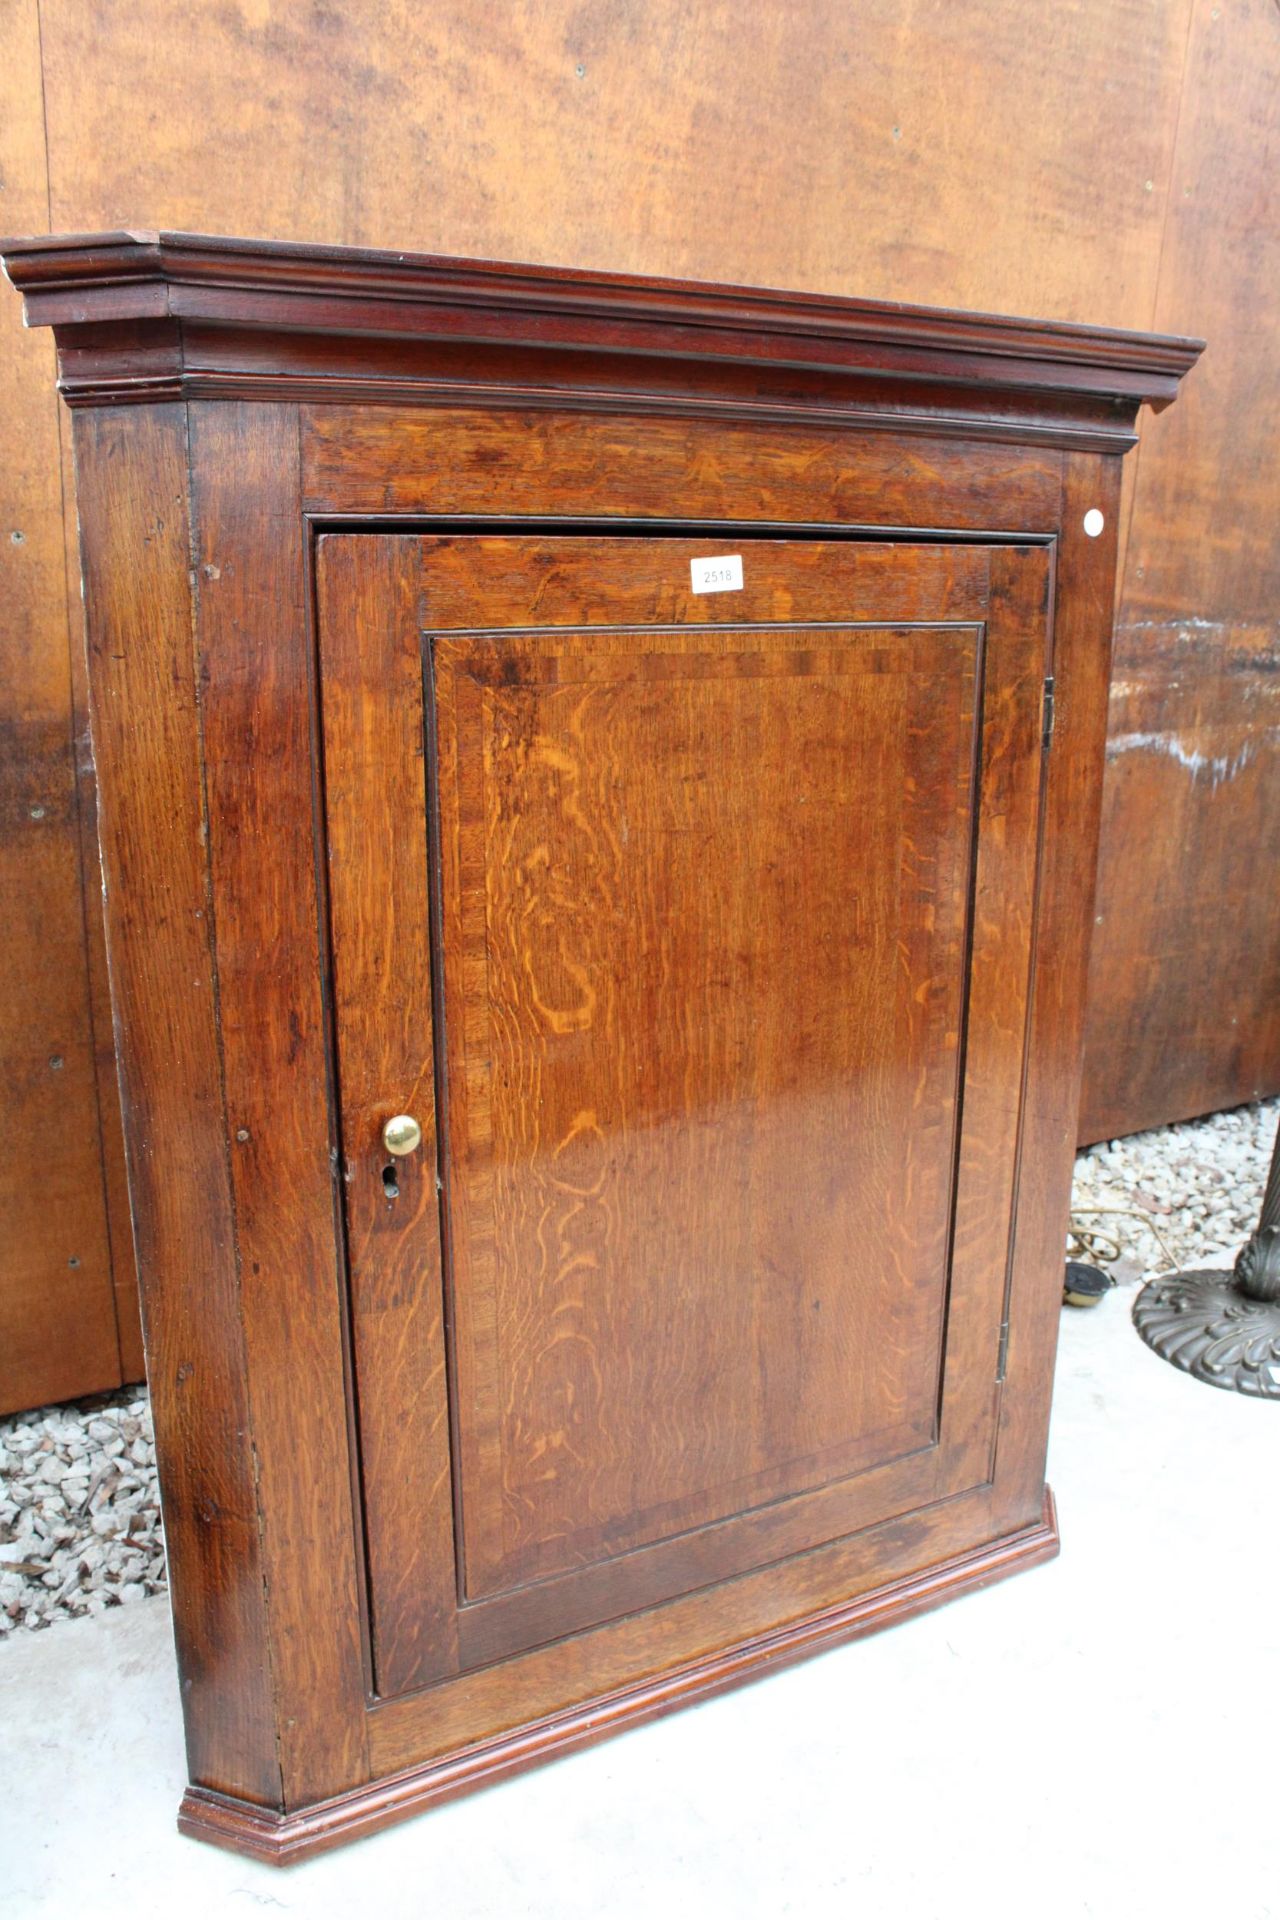 AN OAK AND CROSSBANDED GEORGE III CORNER CUPBOARD WITH STHAPED INTERIOR SHELVES 35" WIDE - Image 2 of 3